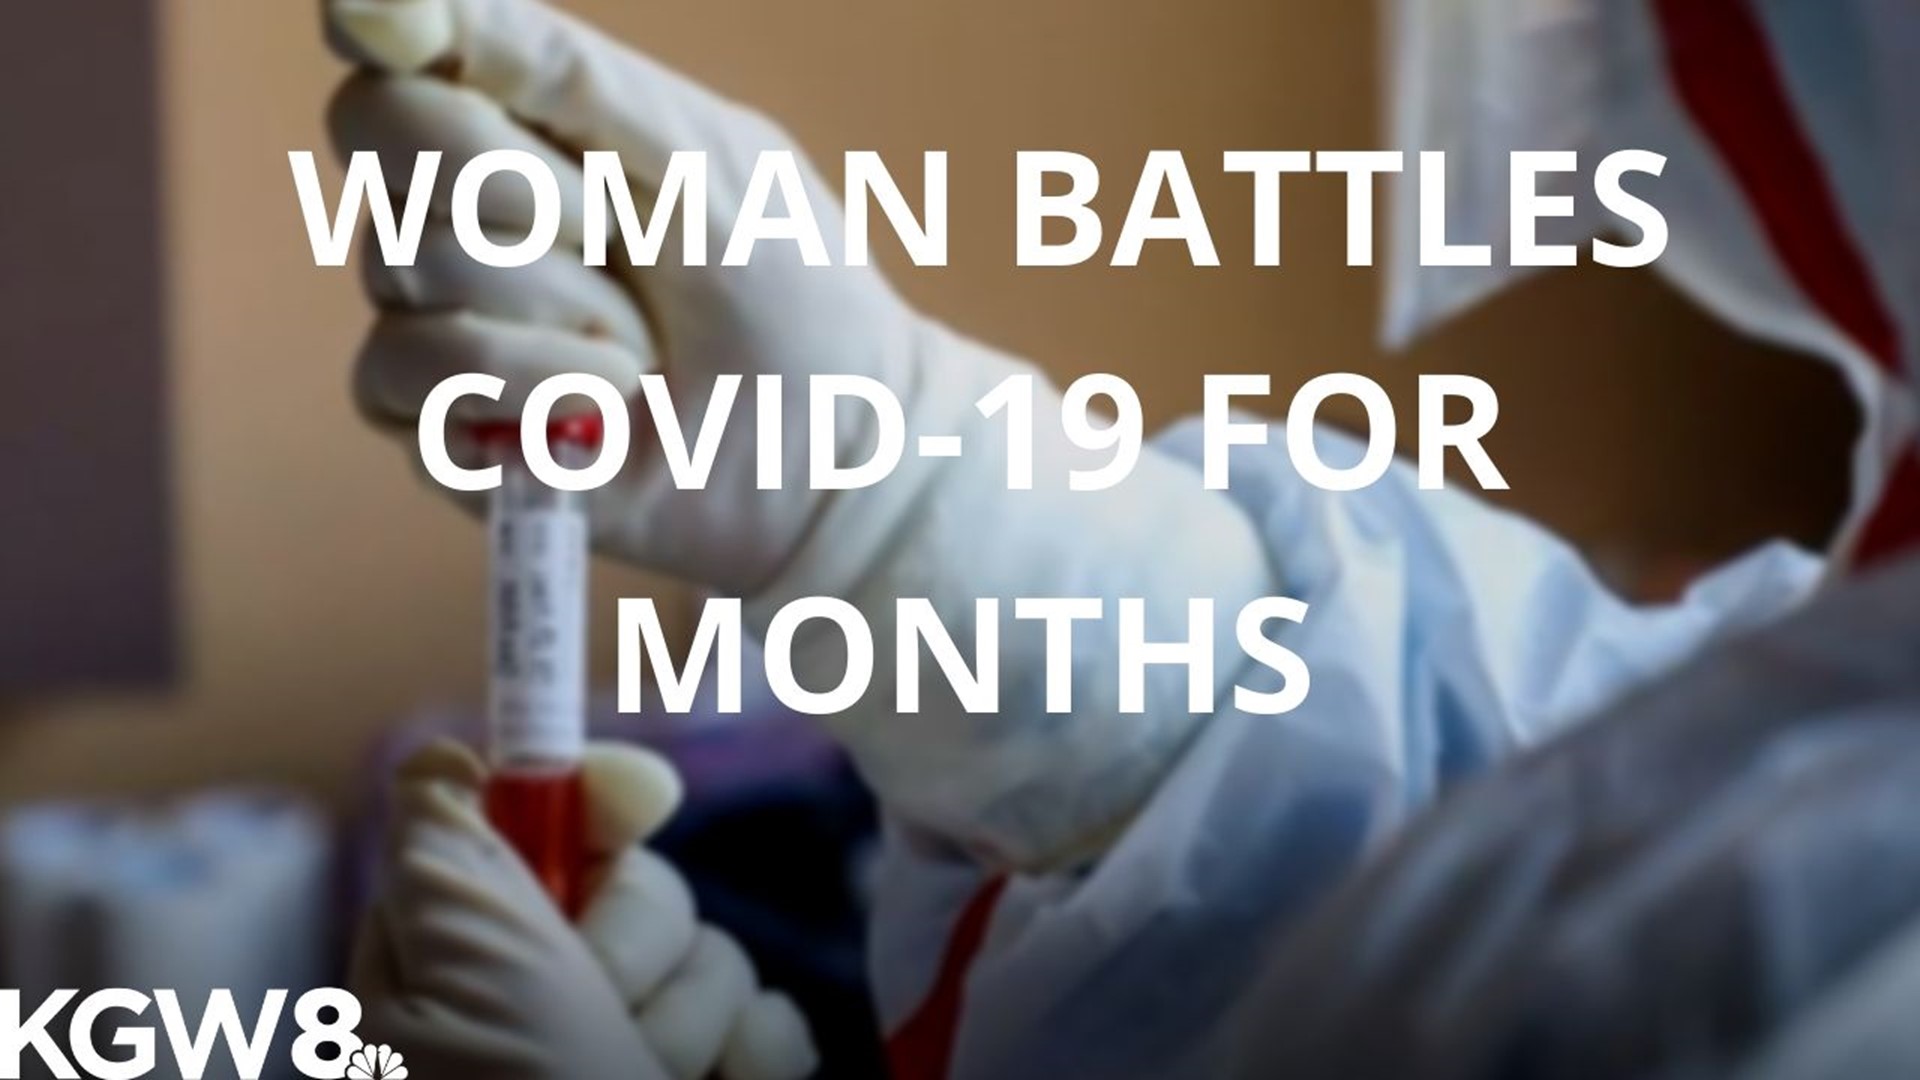 A Keizer, Oregon woman has been sick for months with COVID-19. She spoke with us about the ordeal.